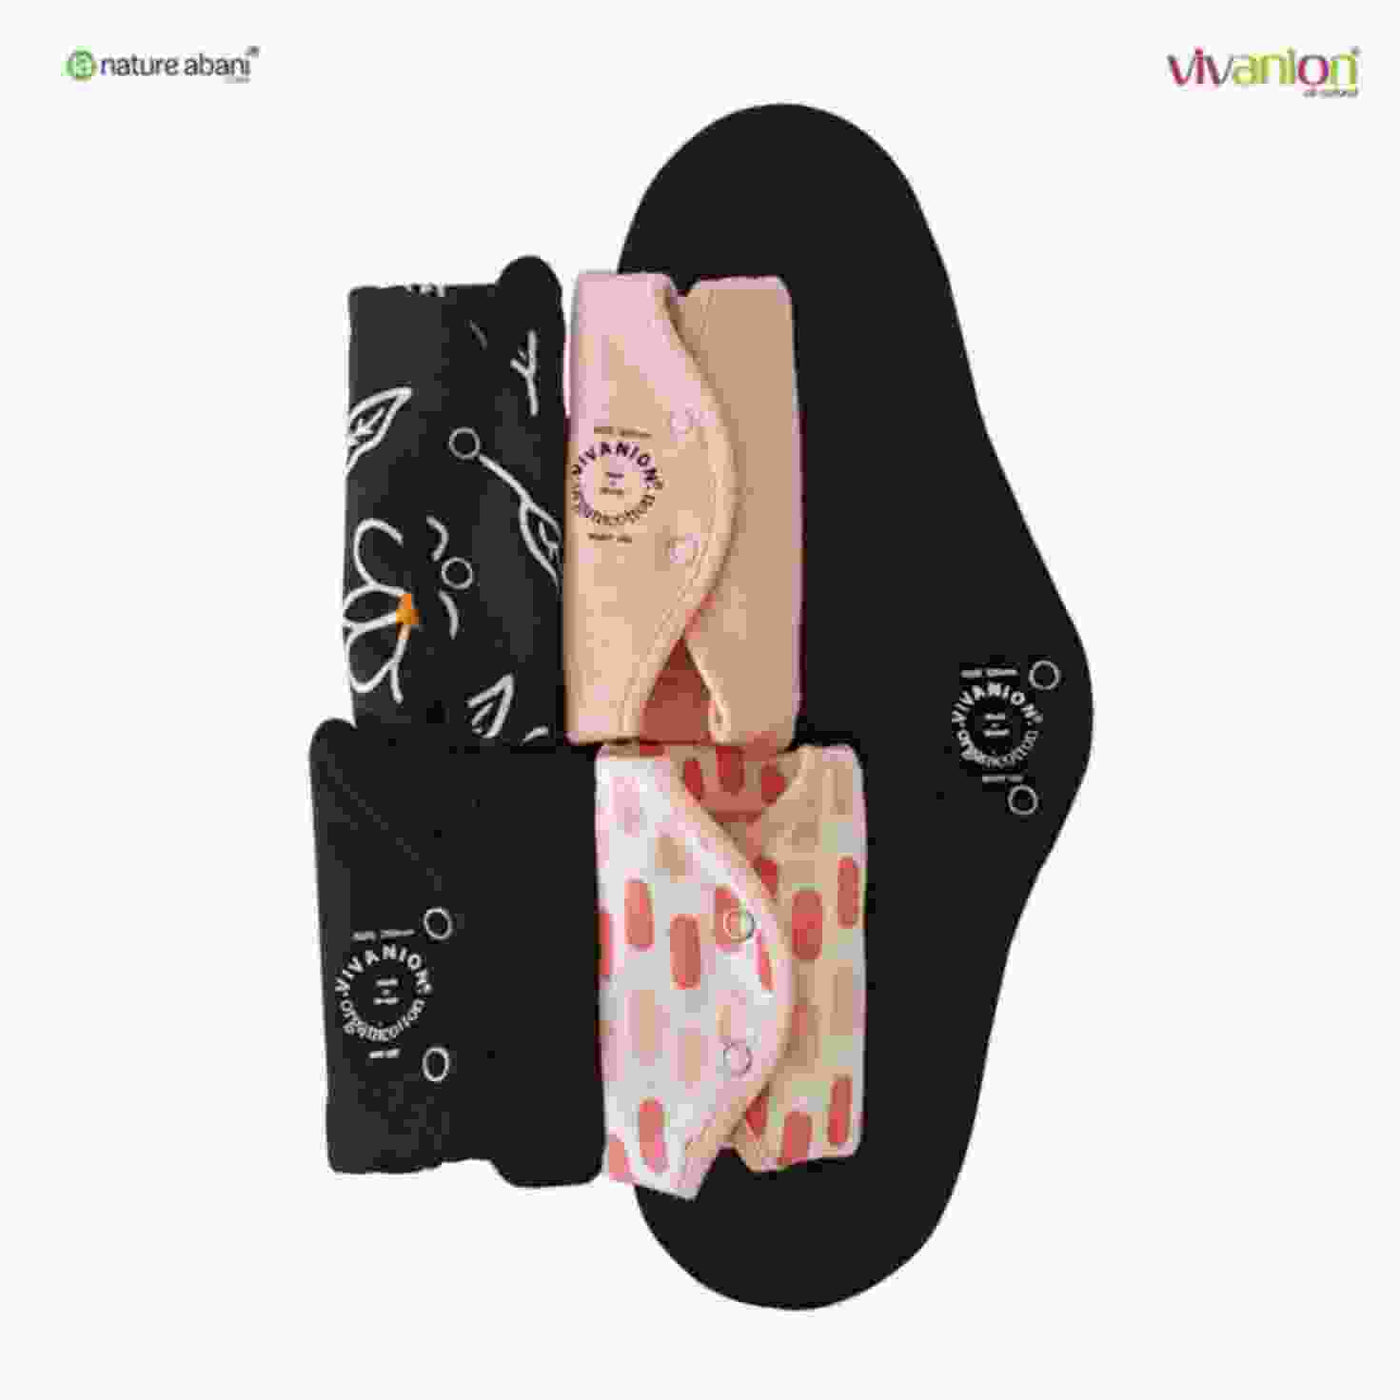 VIVANION Herbal Organic Cotton Re-Usable Sanitary Pads | Anti-Bacterial Coated  | Bio Degradable | Pack of 6 | Combo colors